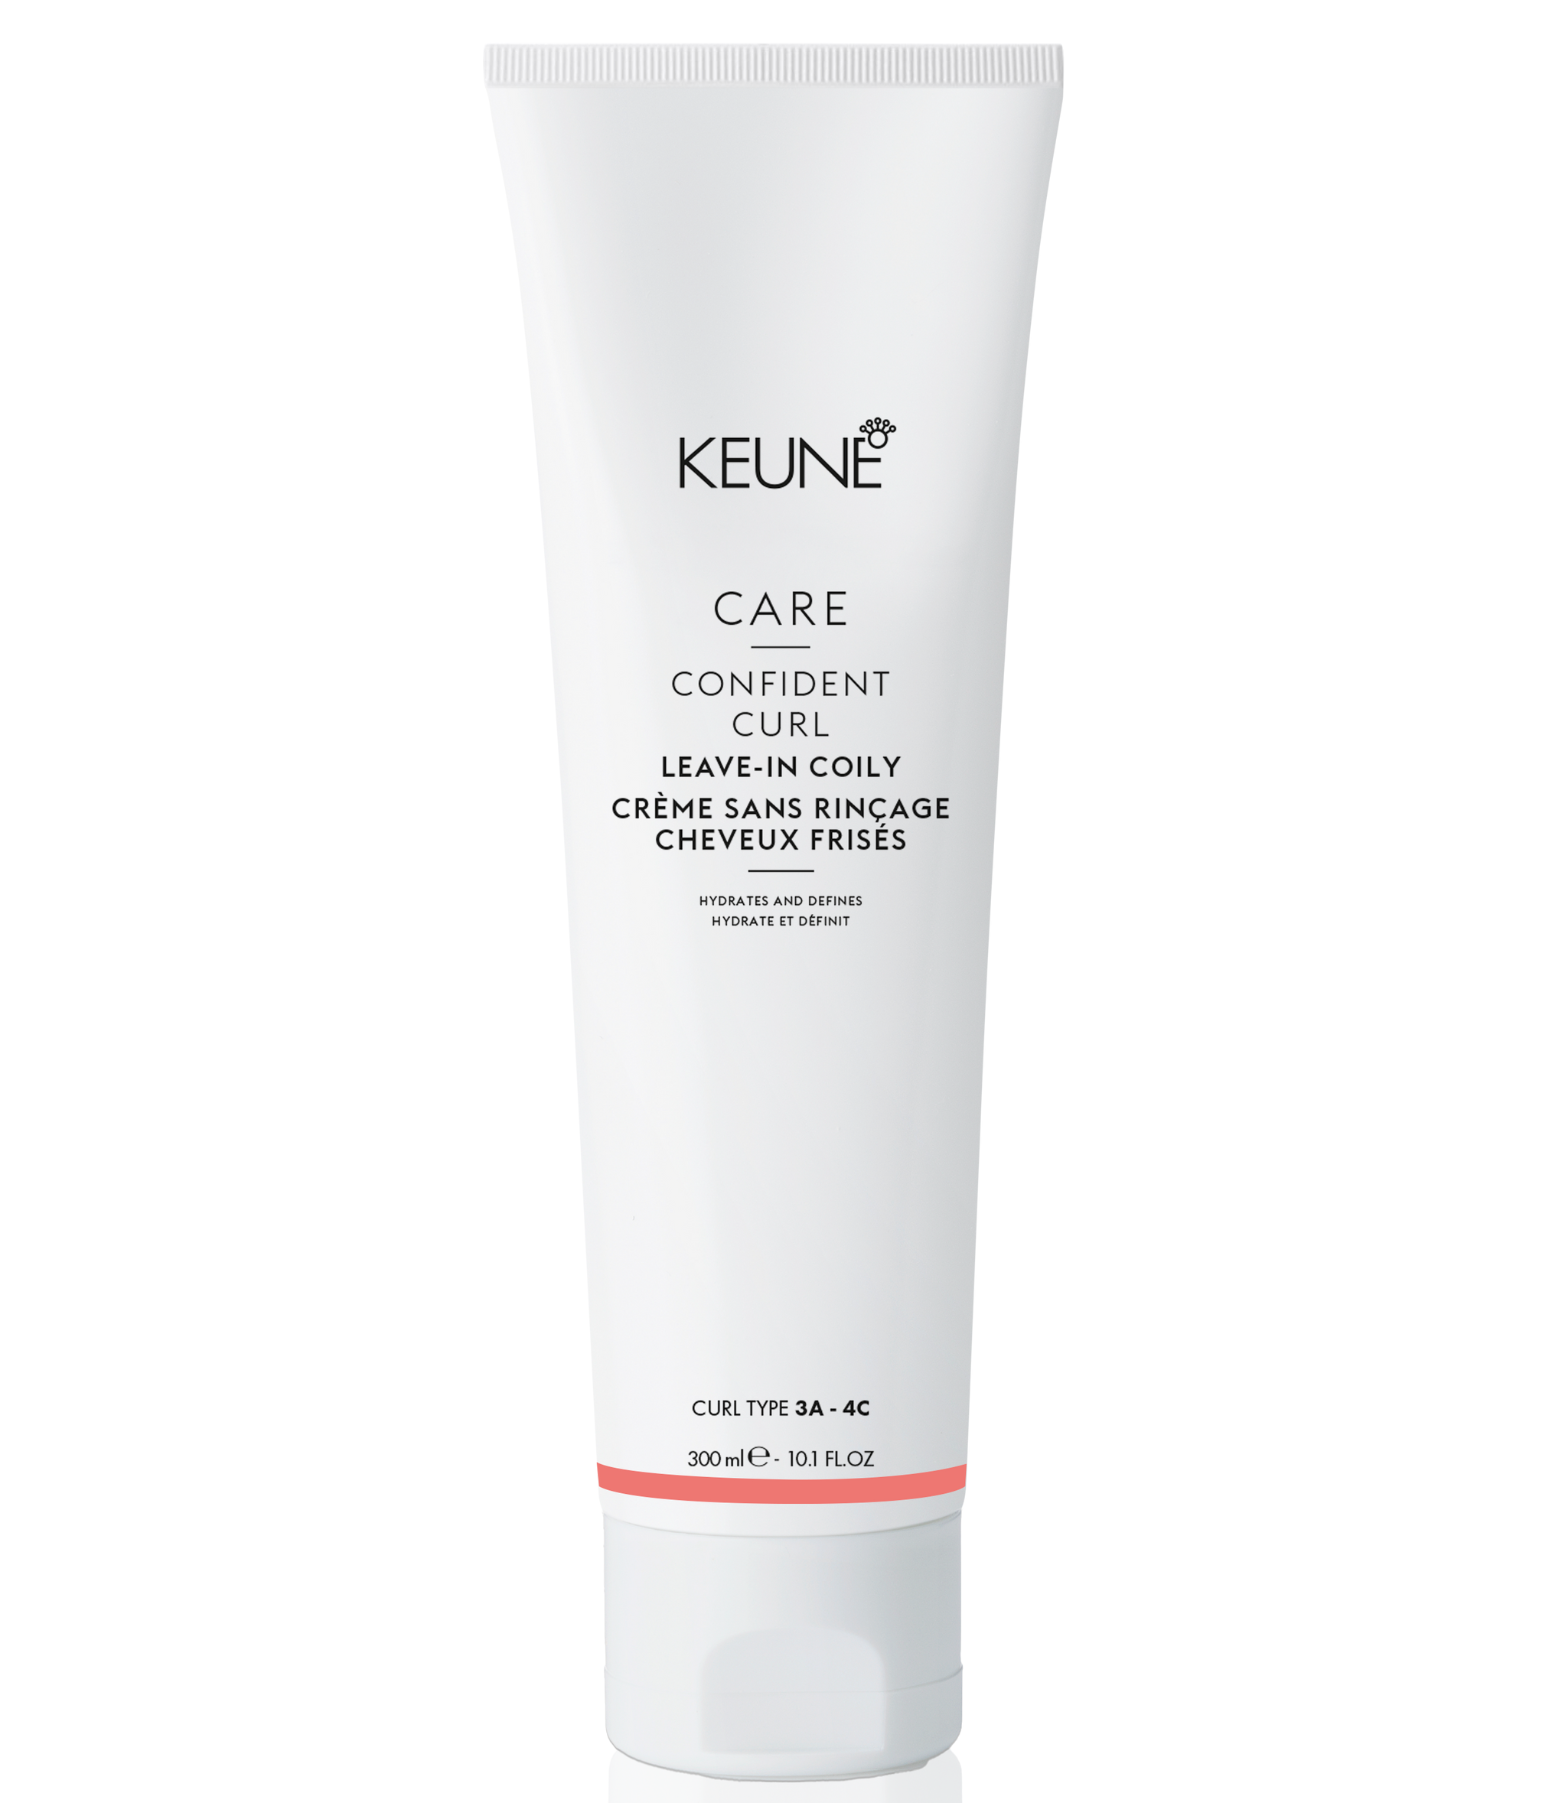 CARE Confident Curl Leave-in Coily nourishes your curls for unmatched smoothness, definition, and shine. This curl cream makes curls elastic and mobile. On keune.ch.